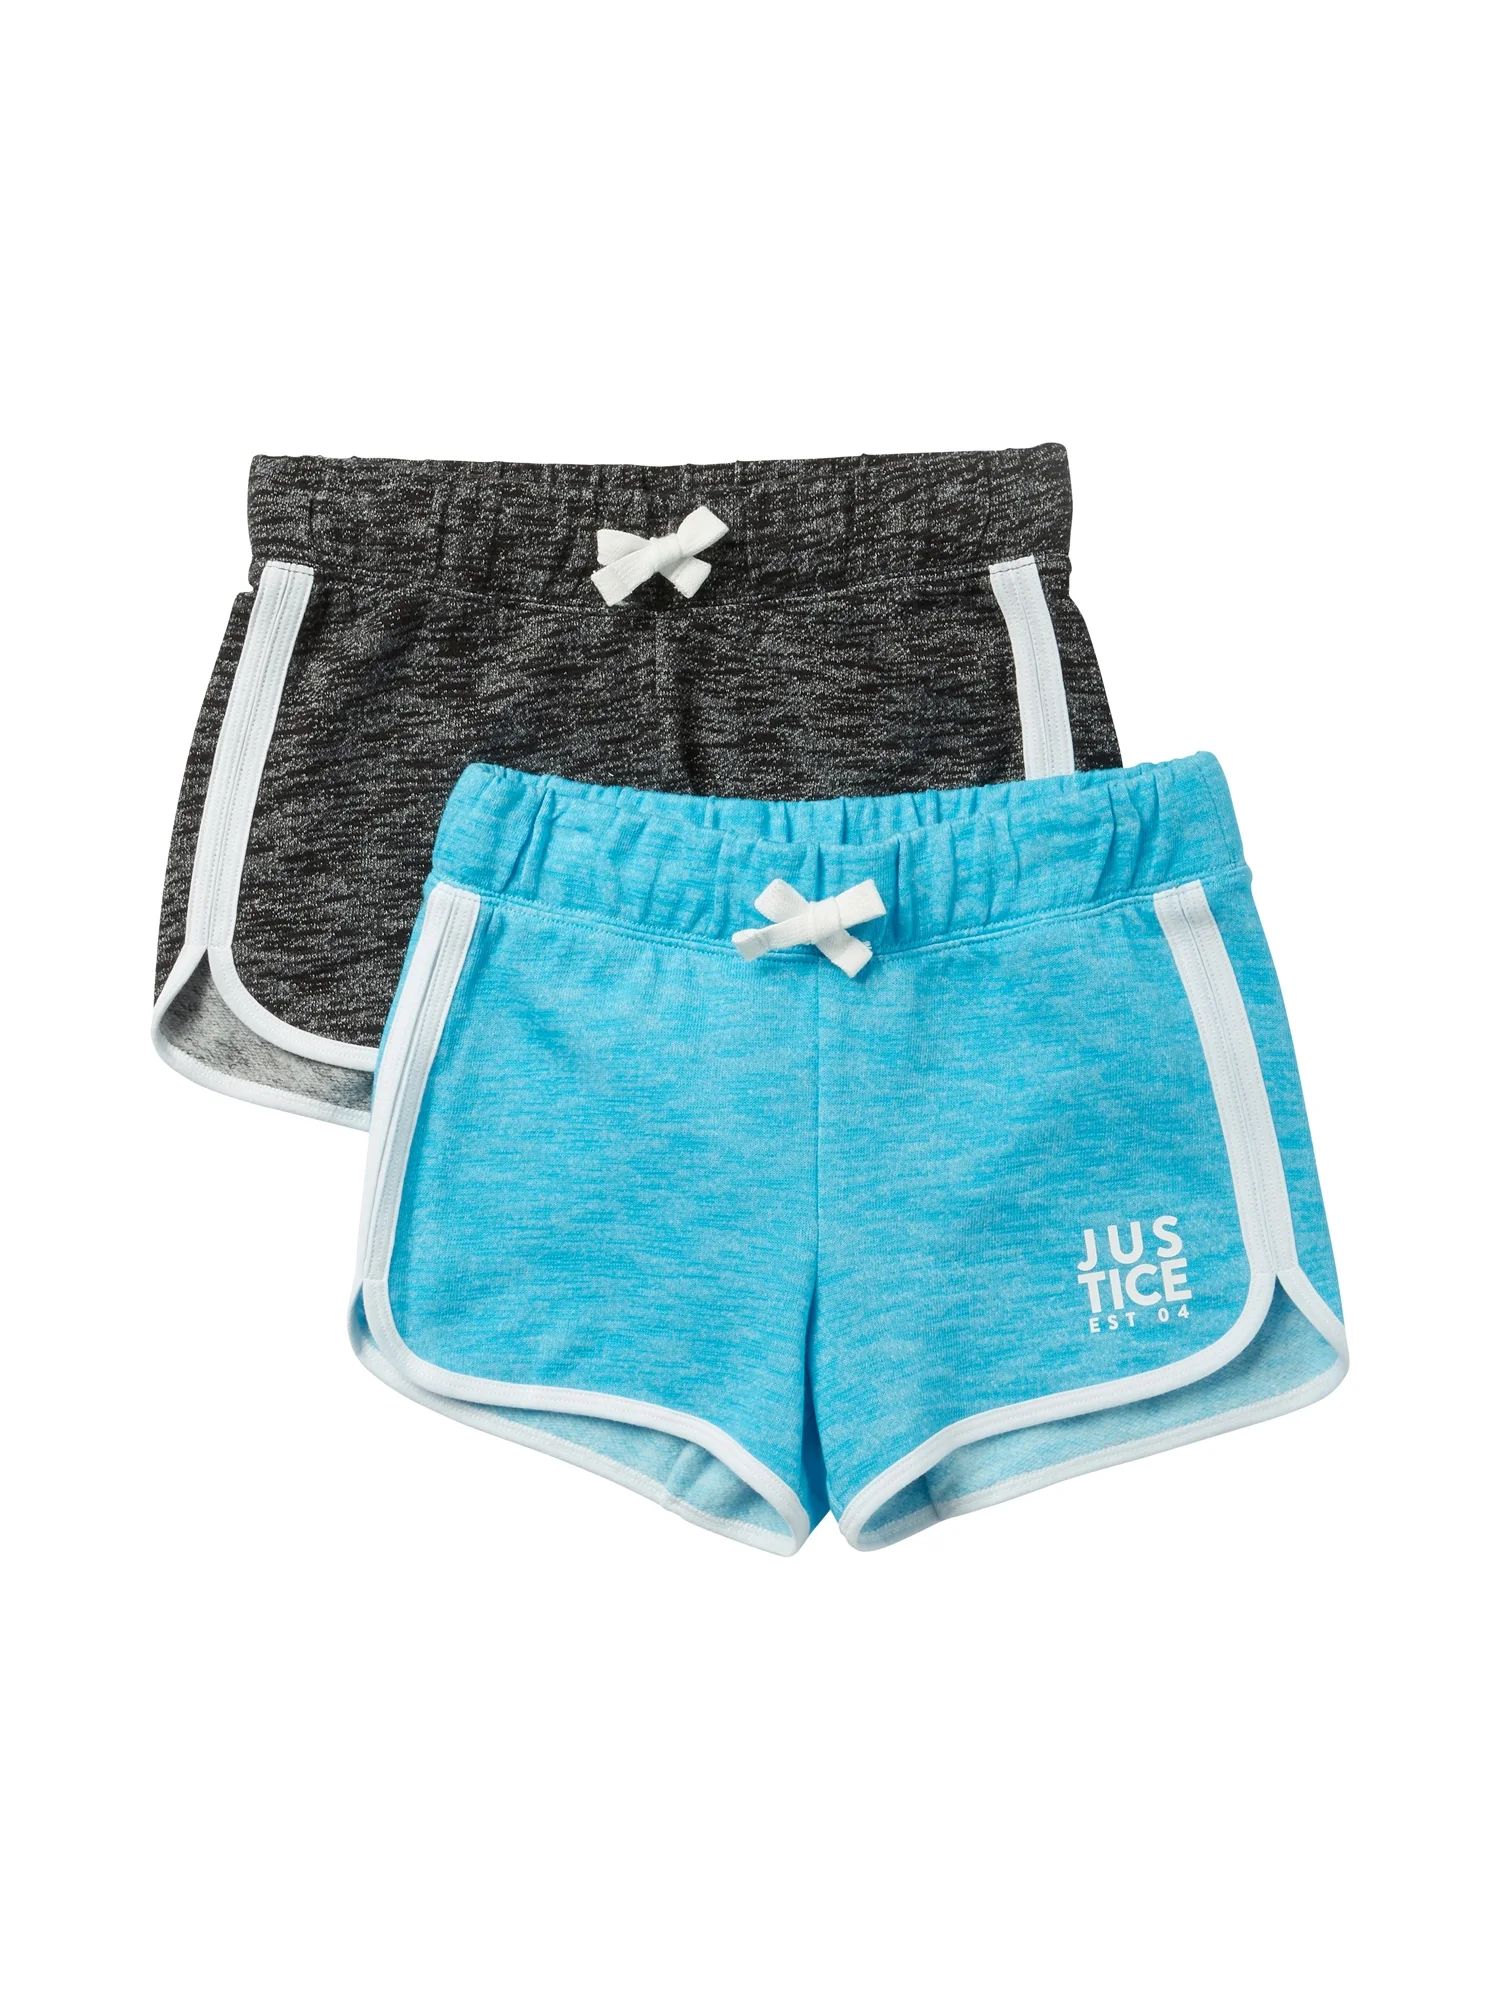 Justice Girls French Terry Dolphin Short, 2-Piece Pack, Sizes XS(5/6)-XL Plus(16/18 Plus) - Walma... | Walmart (US)